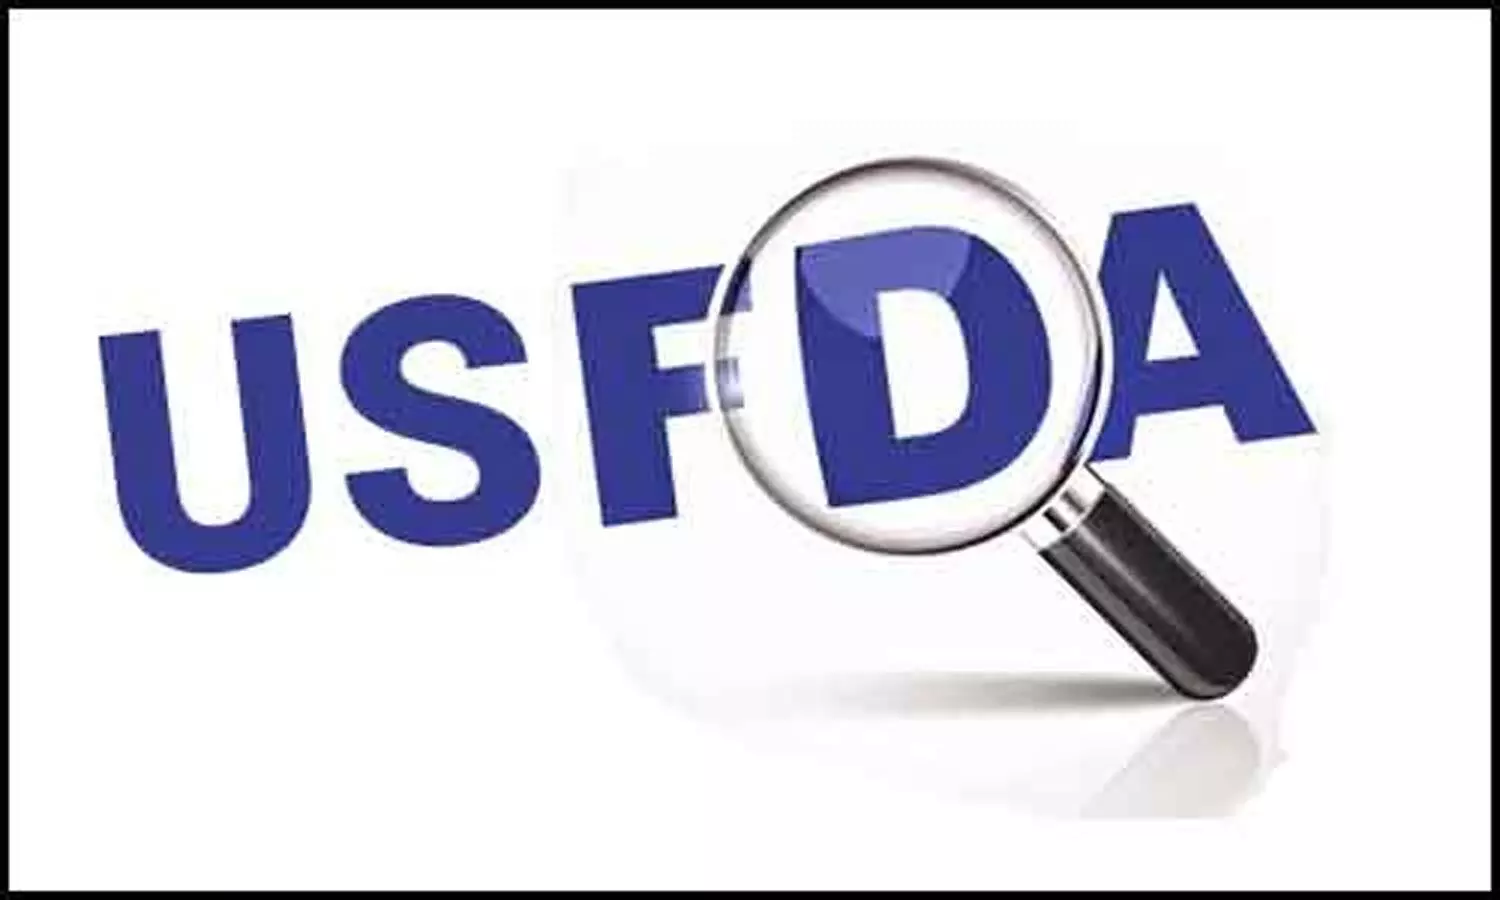 Dr Reddys Labs: USFDA closes warning letter for three sites